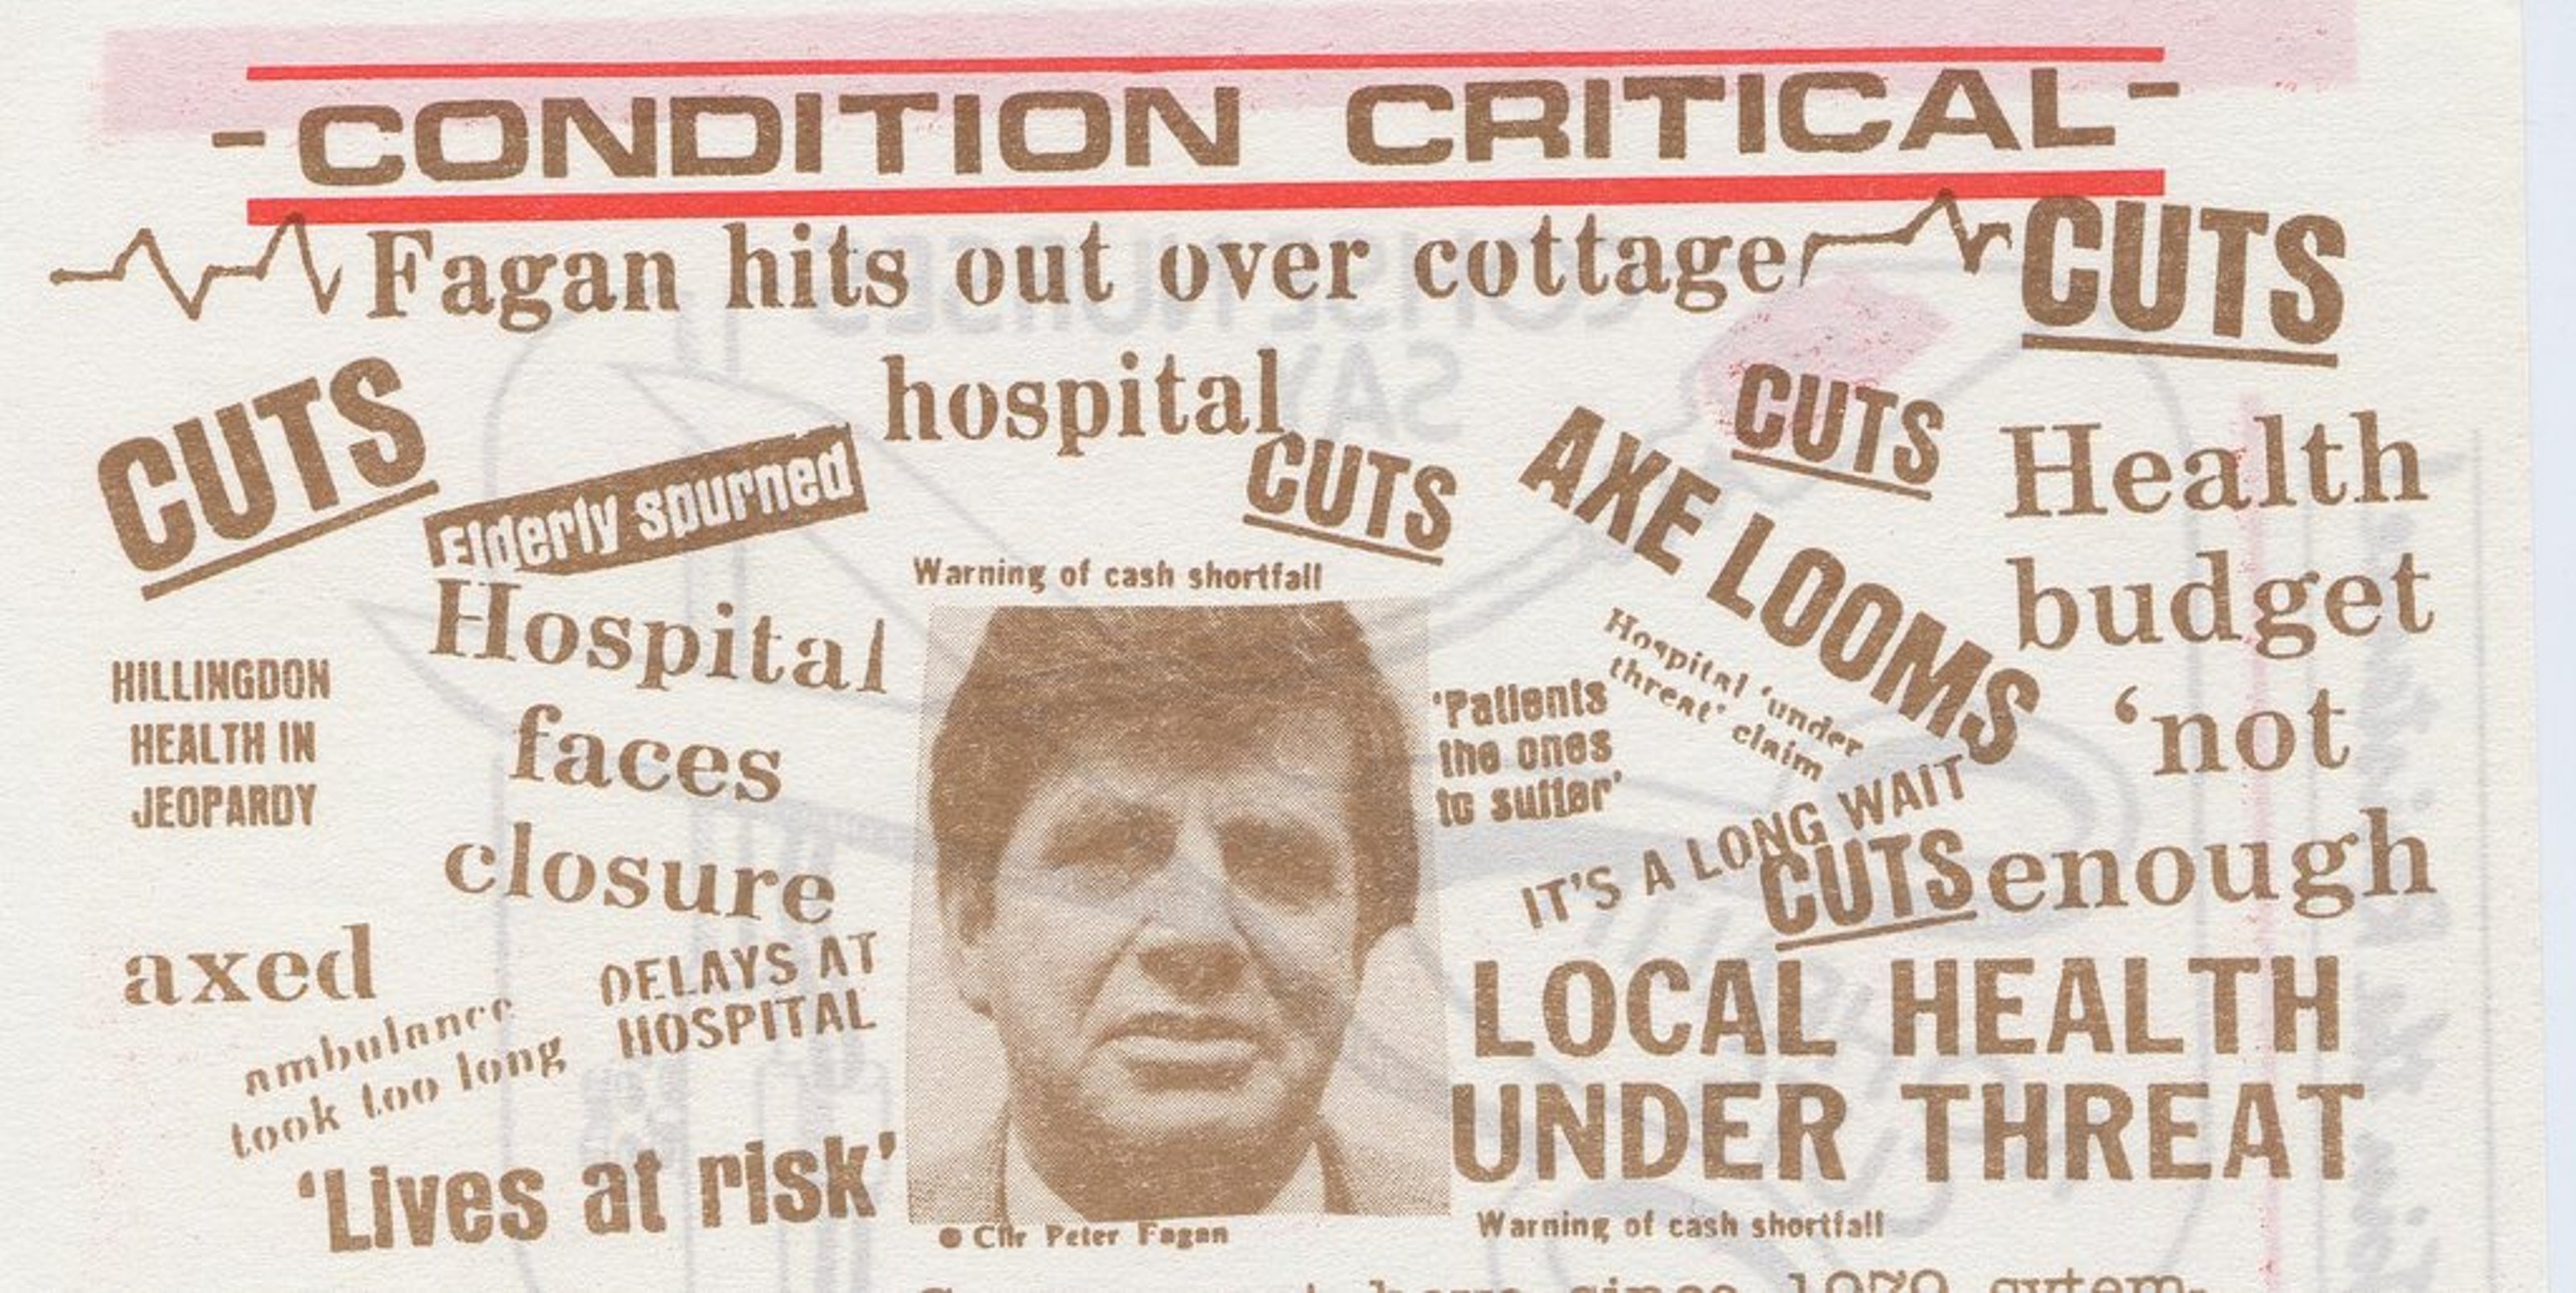 Title: Condition Critical. Fagan hits out over cottage cuts. Health budget not enough, hospital faces closure, lives at risk, local health under threat